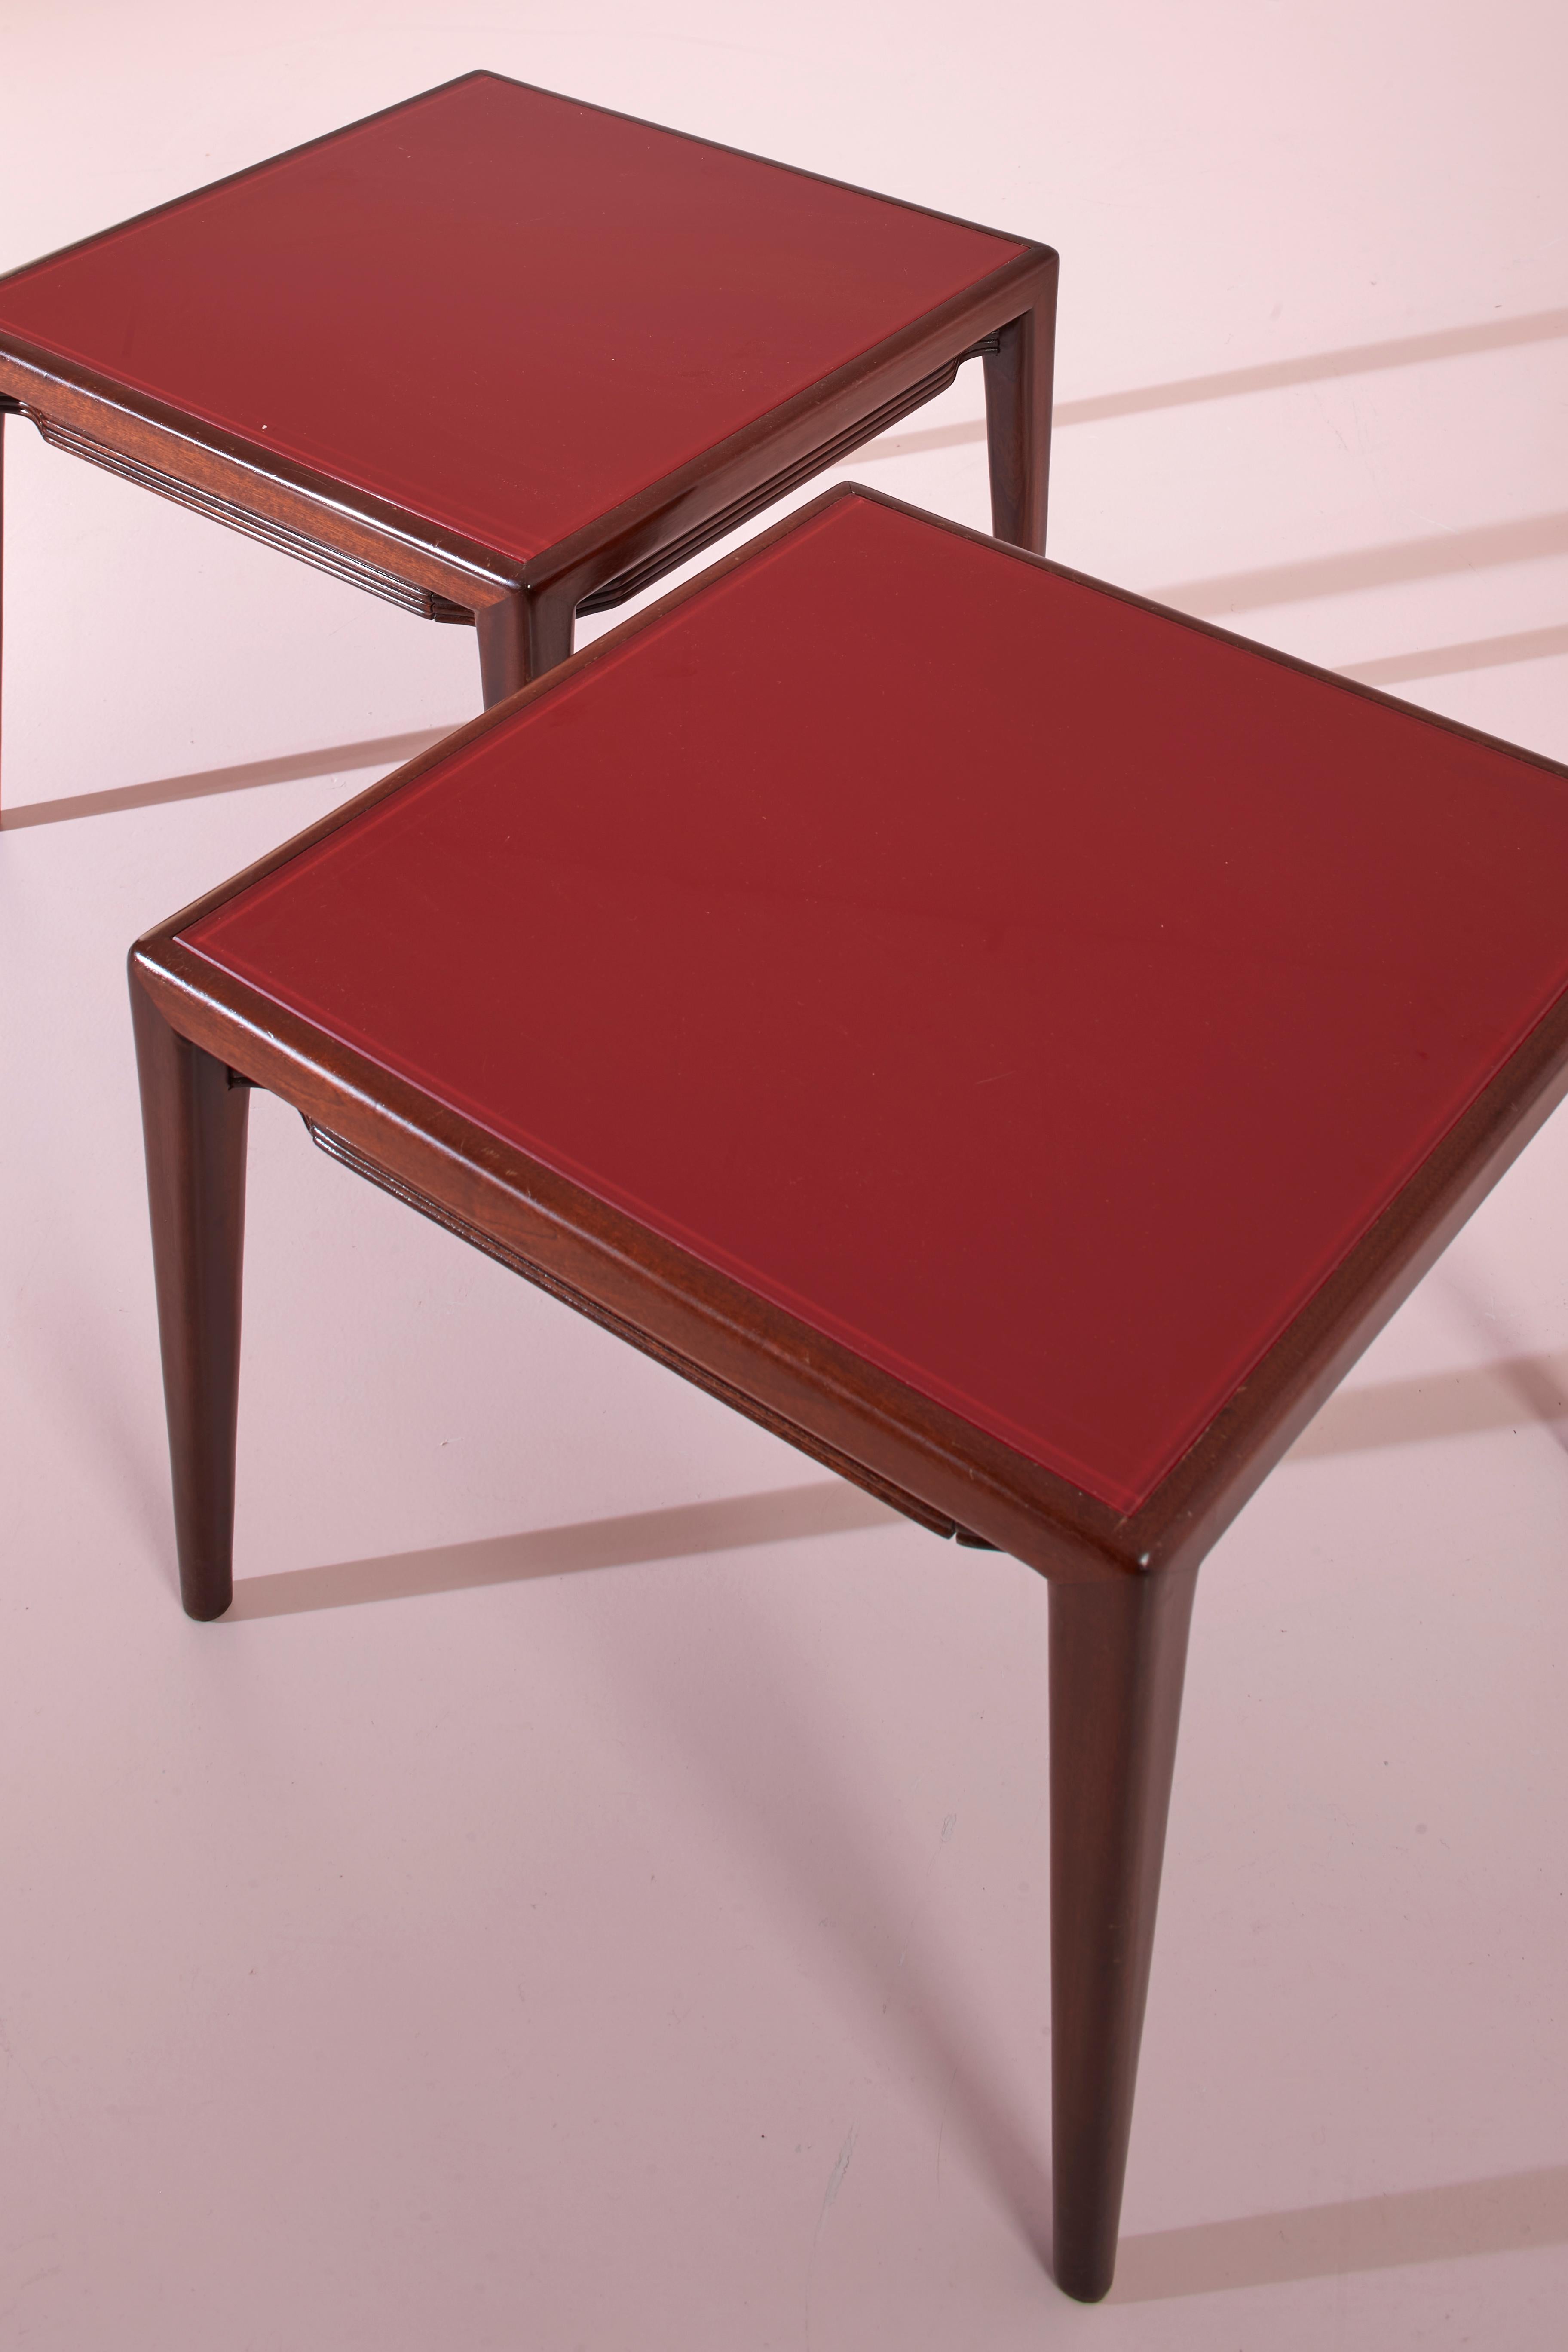 Osvaldo Borsani wooden and red glass side tables with a drawer, Italy, 1950s For Sale 3